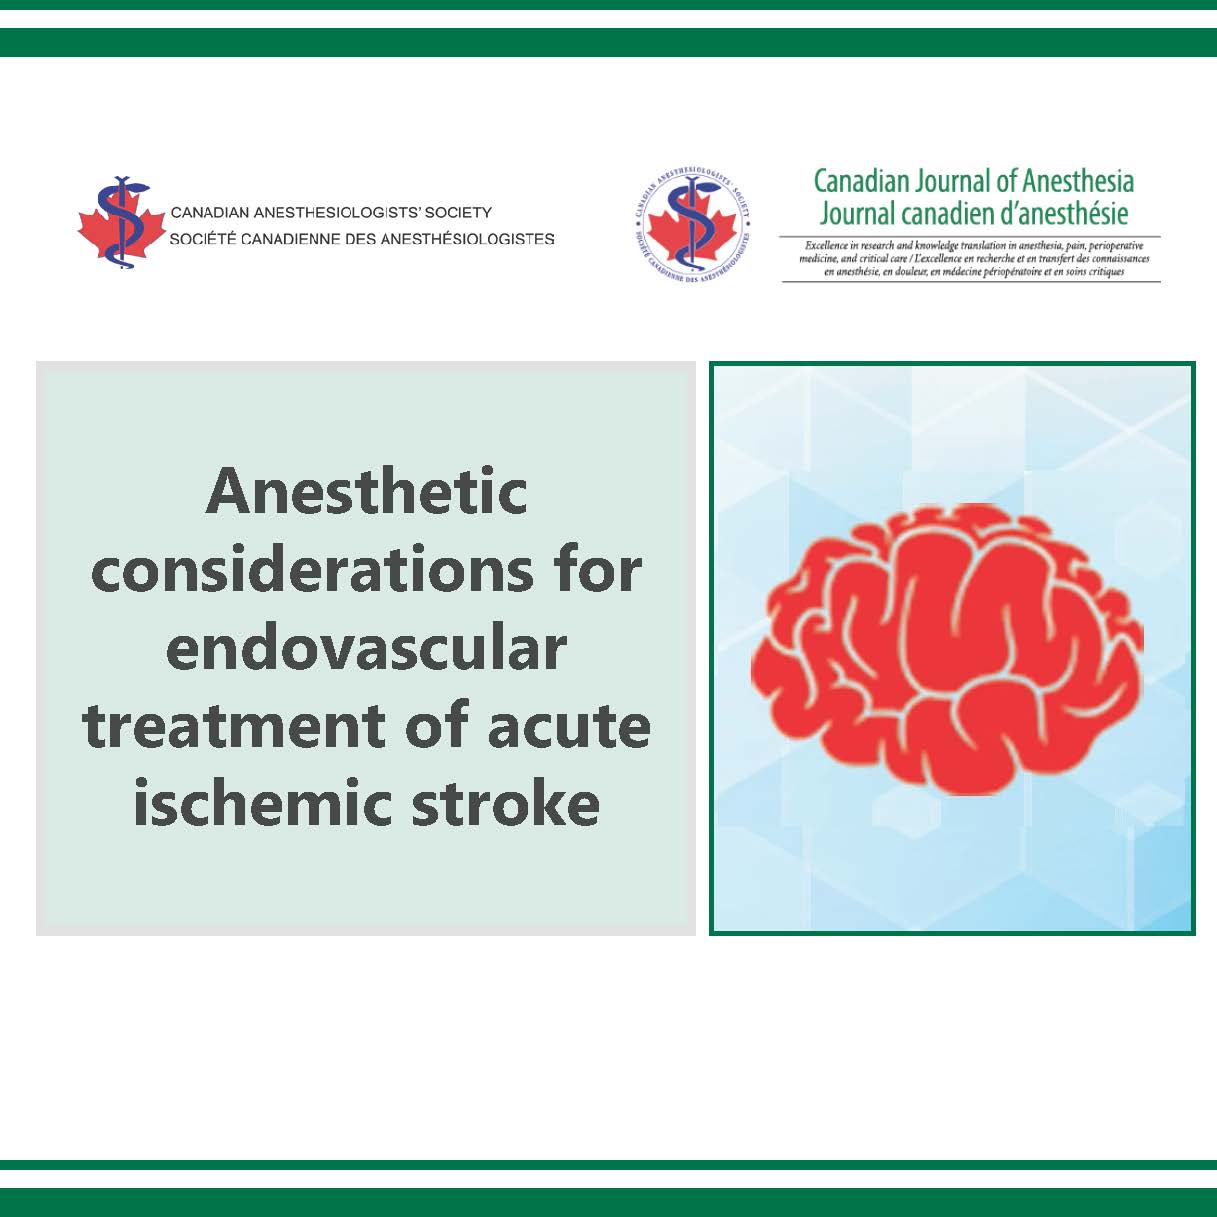 Anesthetic considerations for endovascular treatment of acute ischemic stroke